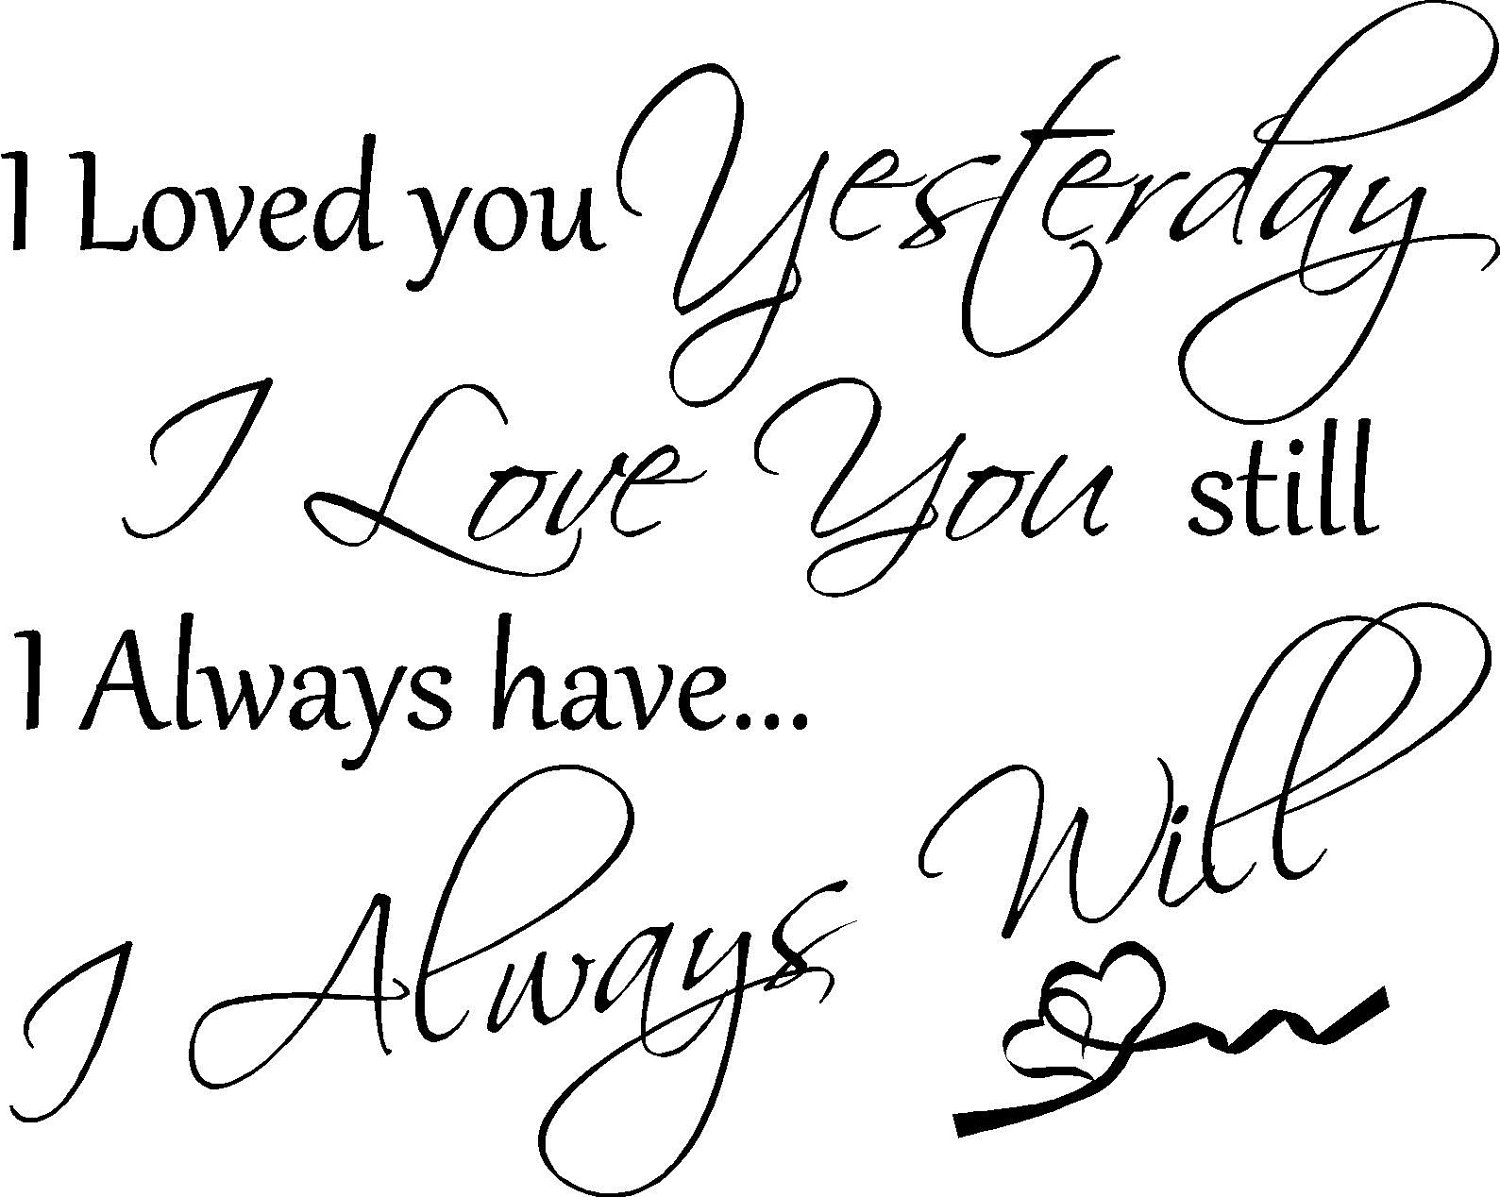 30 love you picture quotes quote i loved you yesterday love still